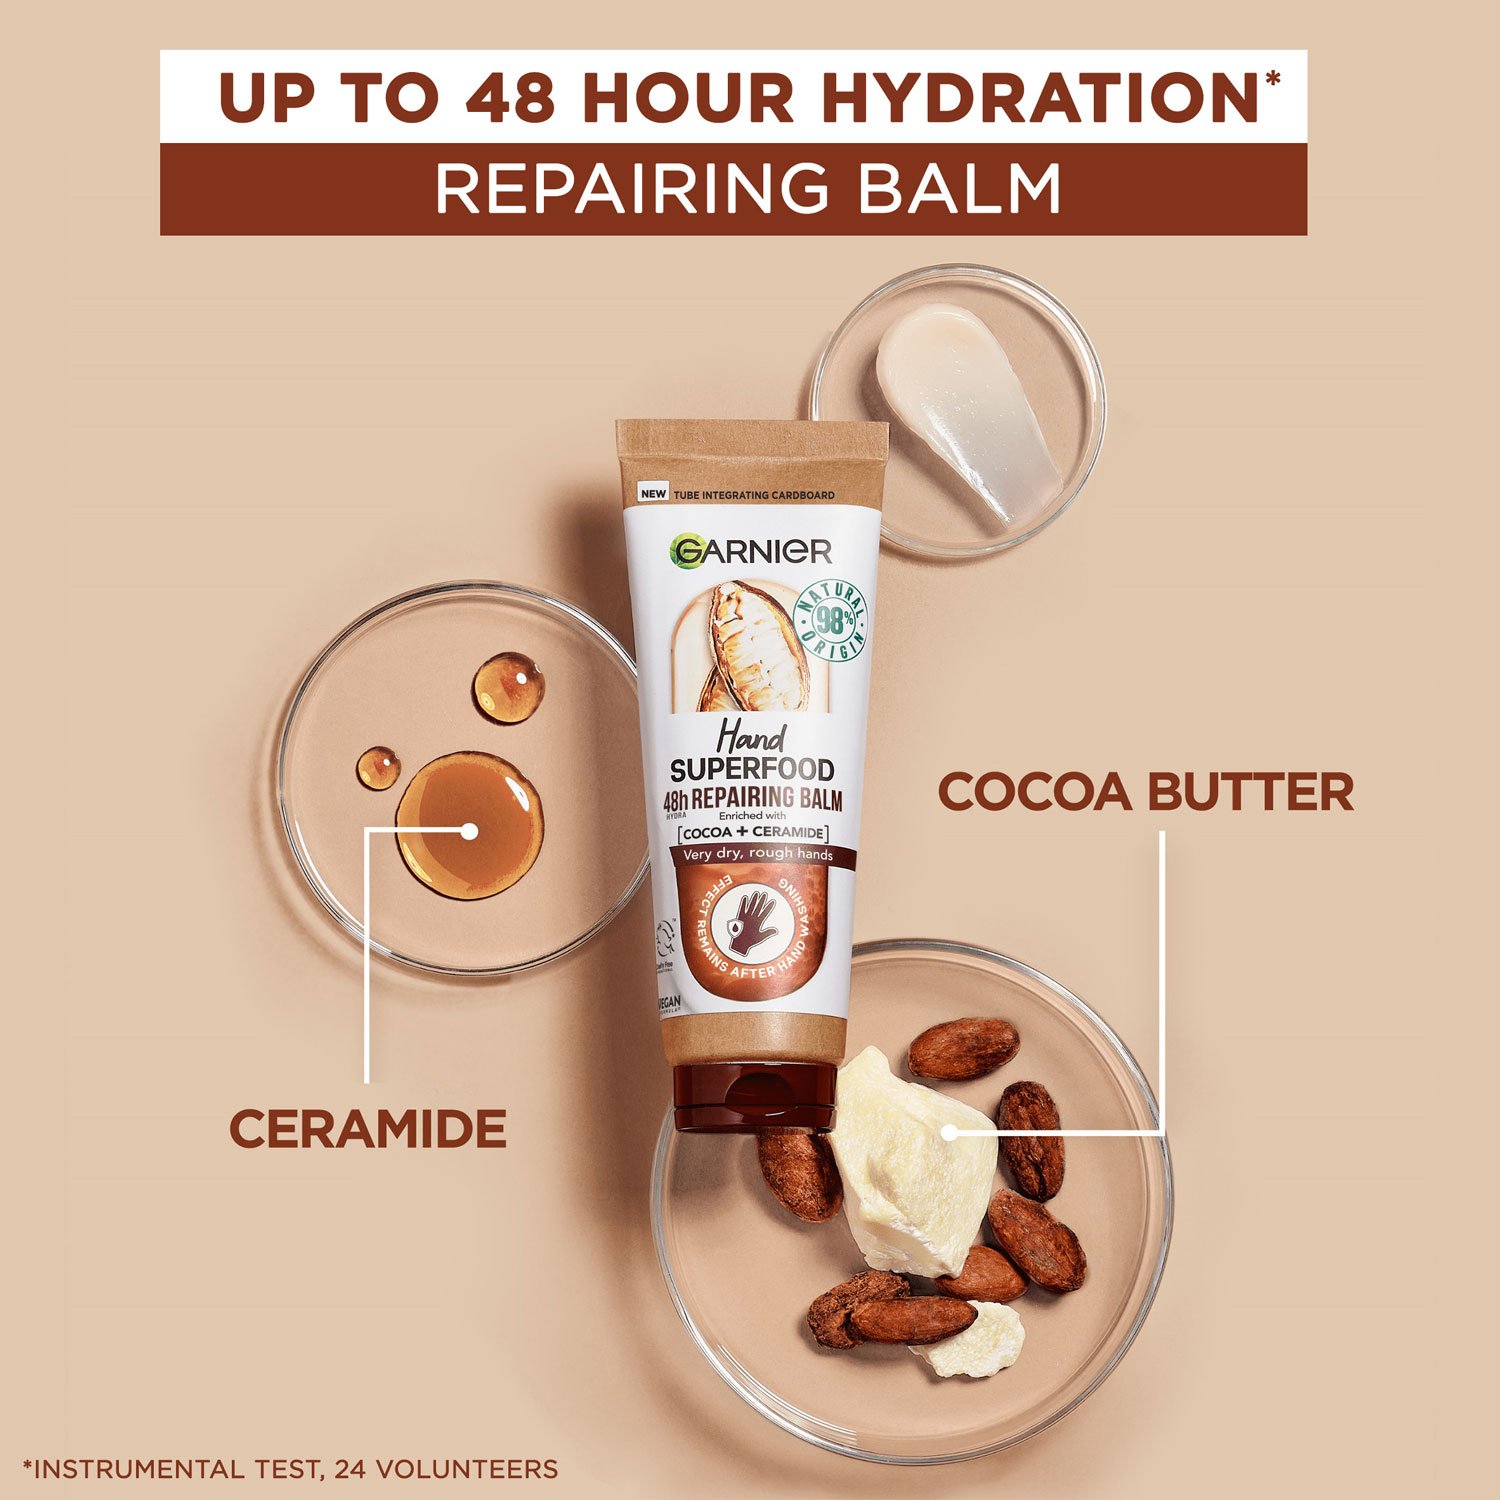 4 Hand Superfood Cocoa Ceramide